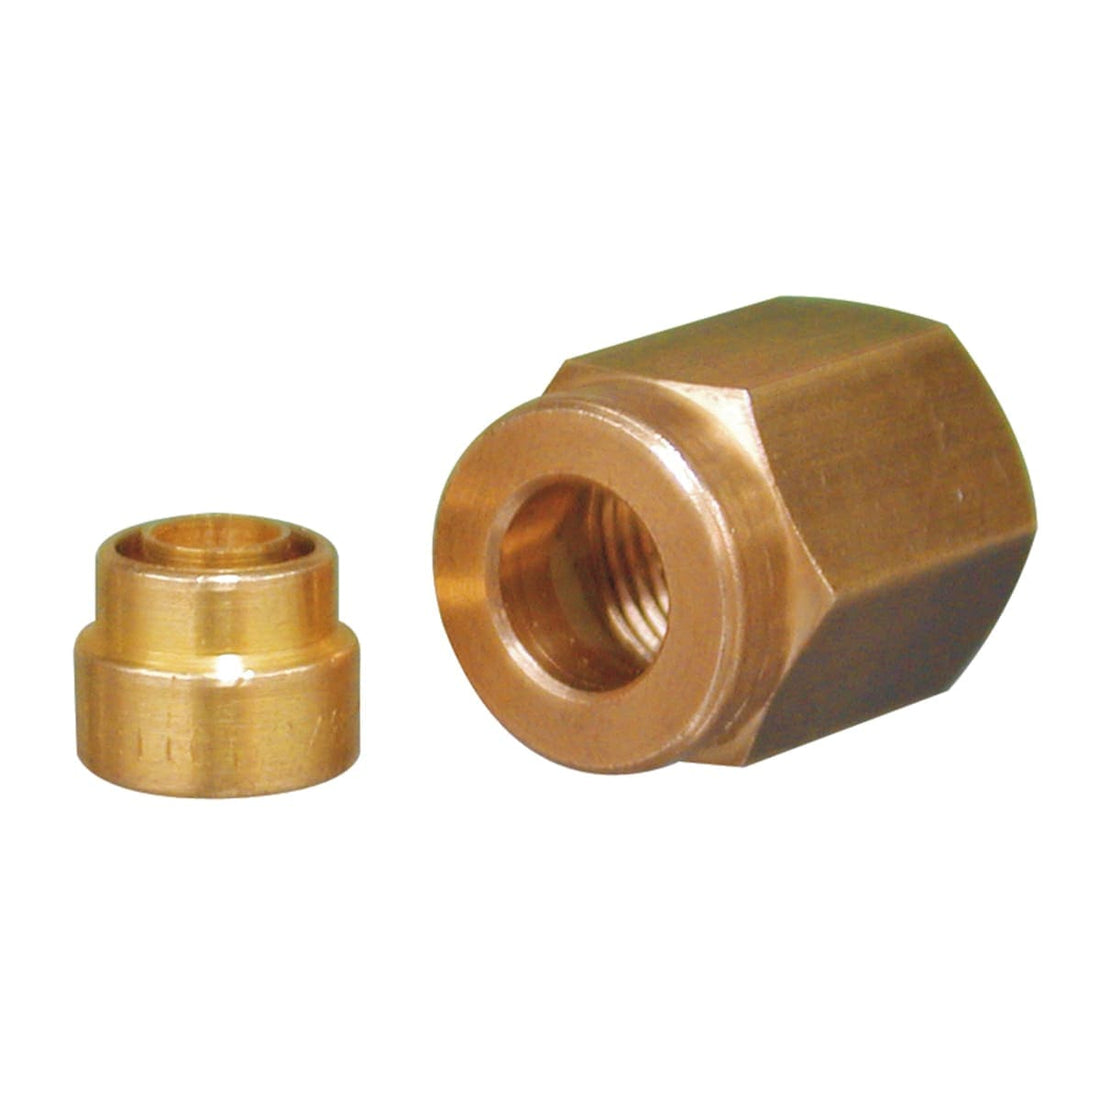 3/8 INCH DIA. SELF-CLAMPING UNION FOR COPPER AIR CONDITIONING PIPE